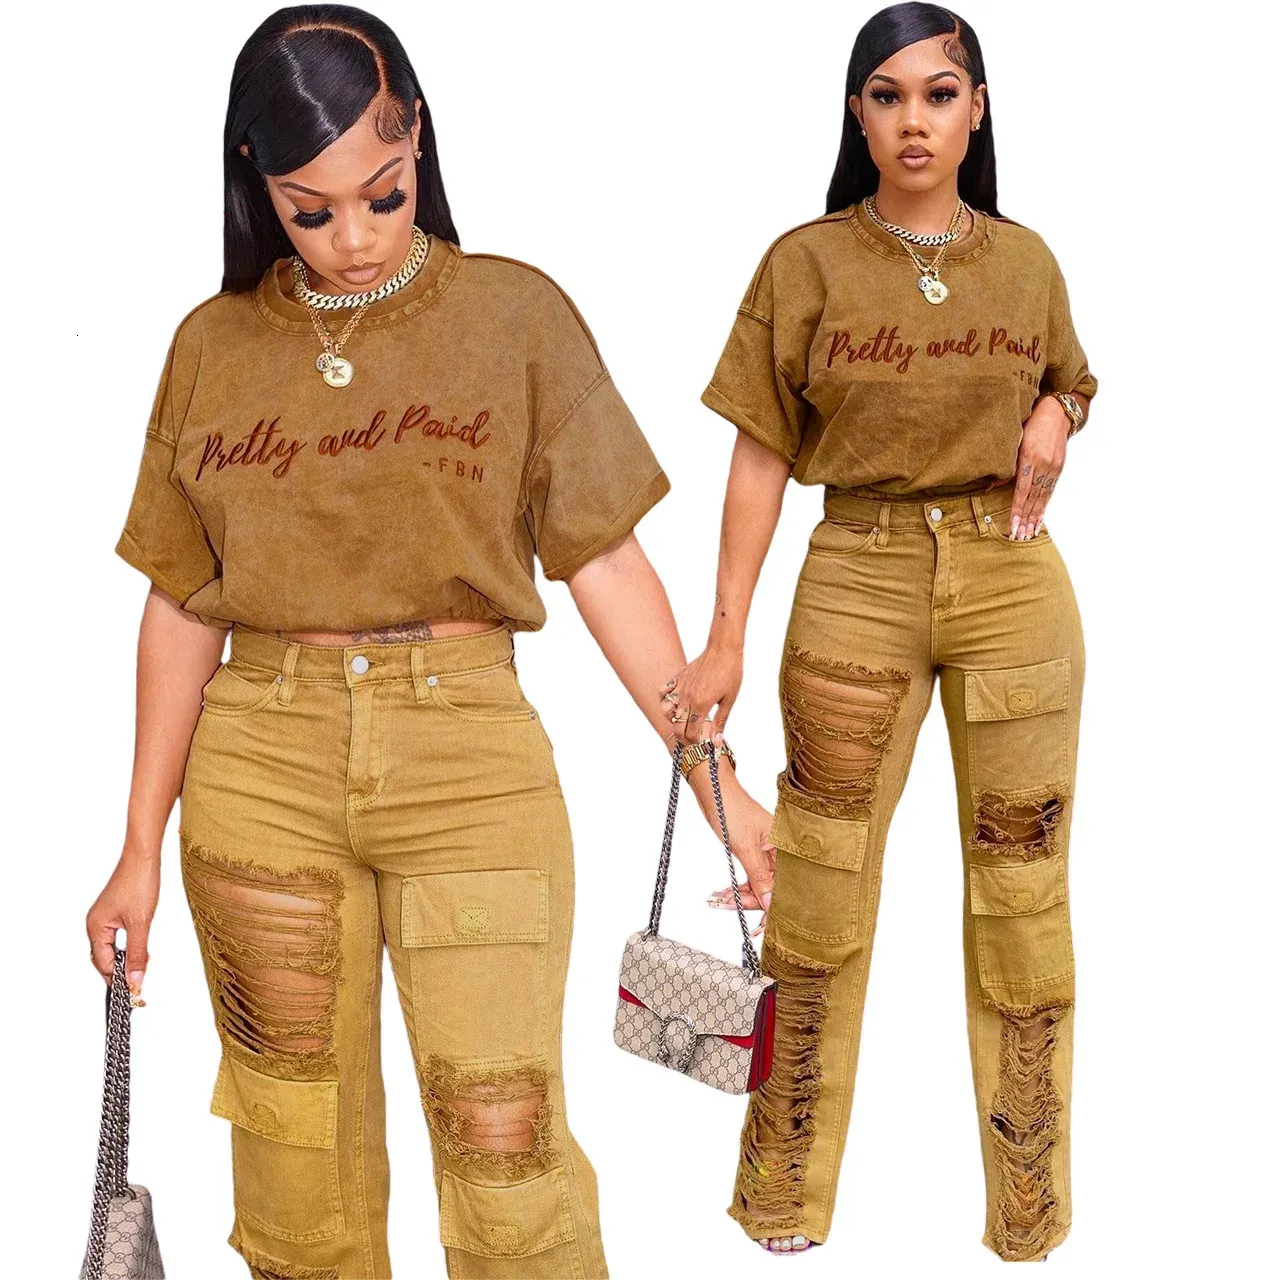 Echoine Short Sleeve Letter Brodery Tshirt and Cargo Denim Pants Two Piece Set Casual Fashion Matching Streetwear Outfits 231220